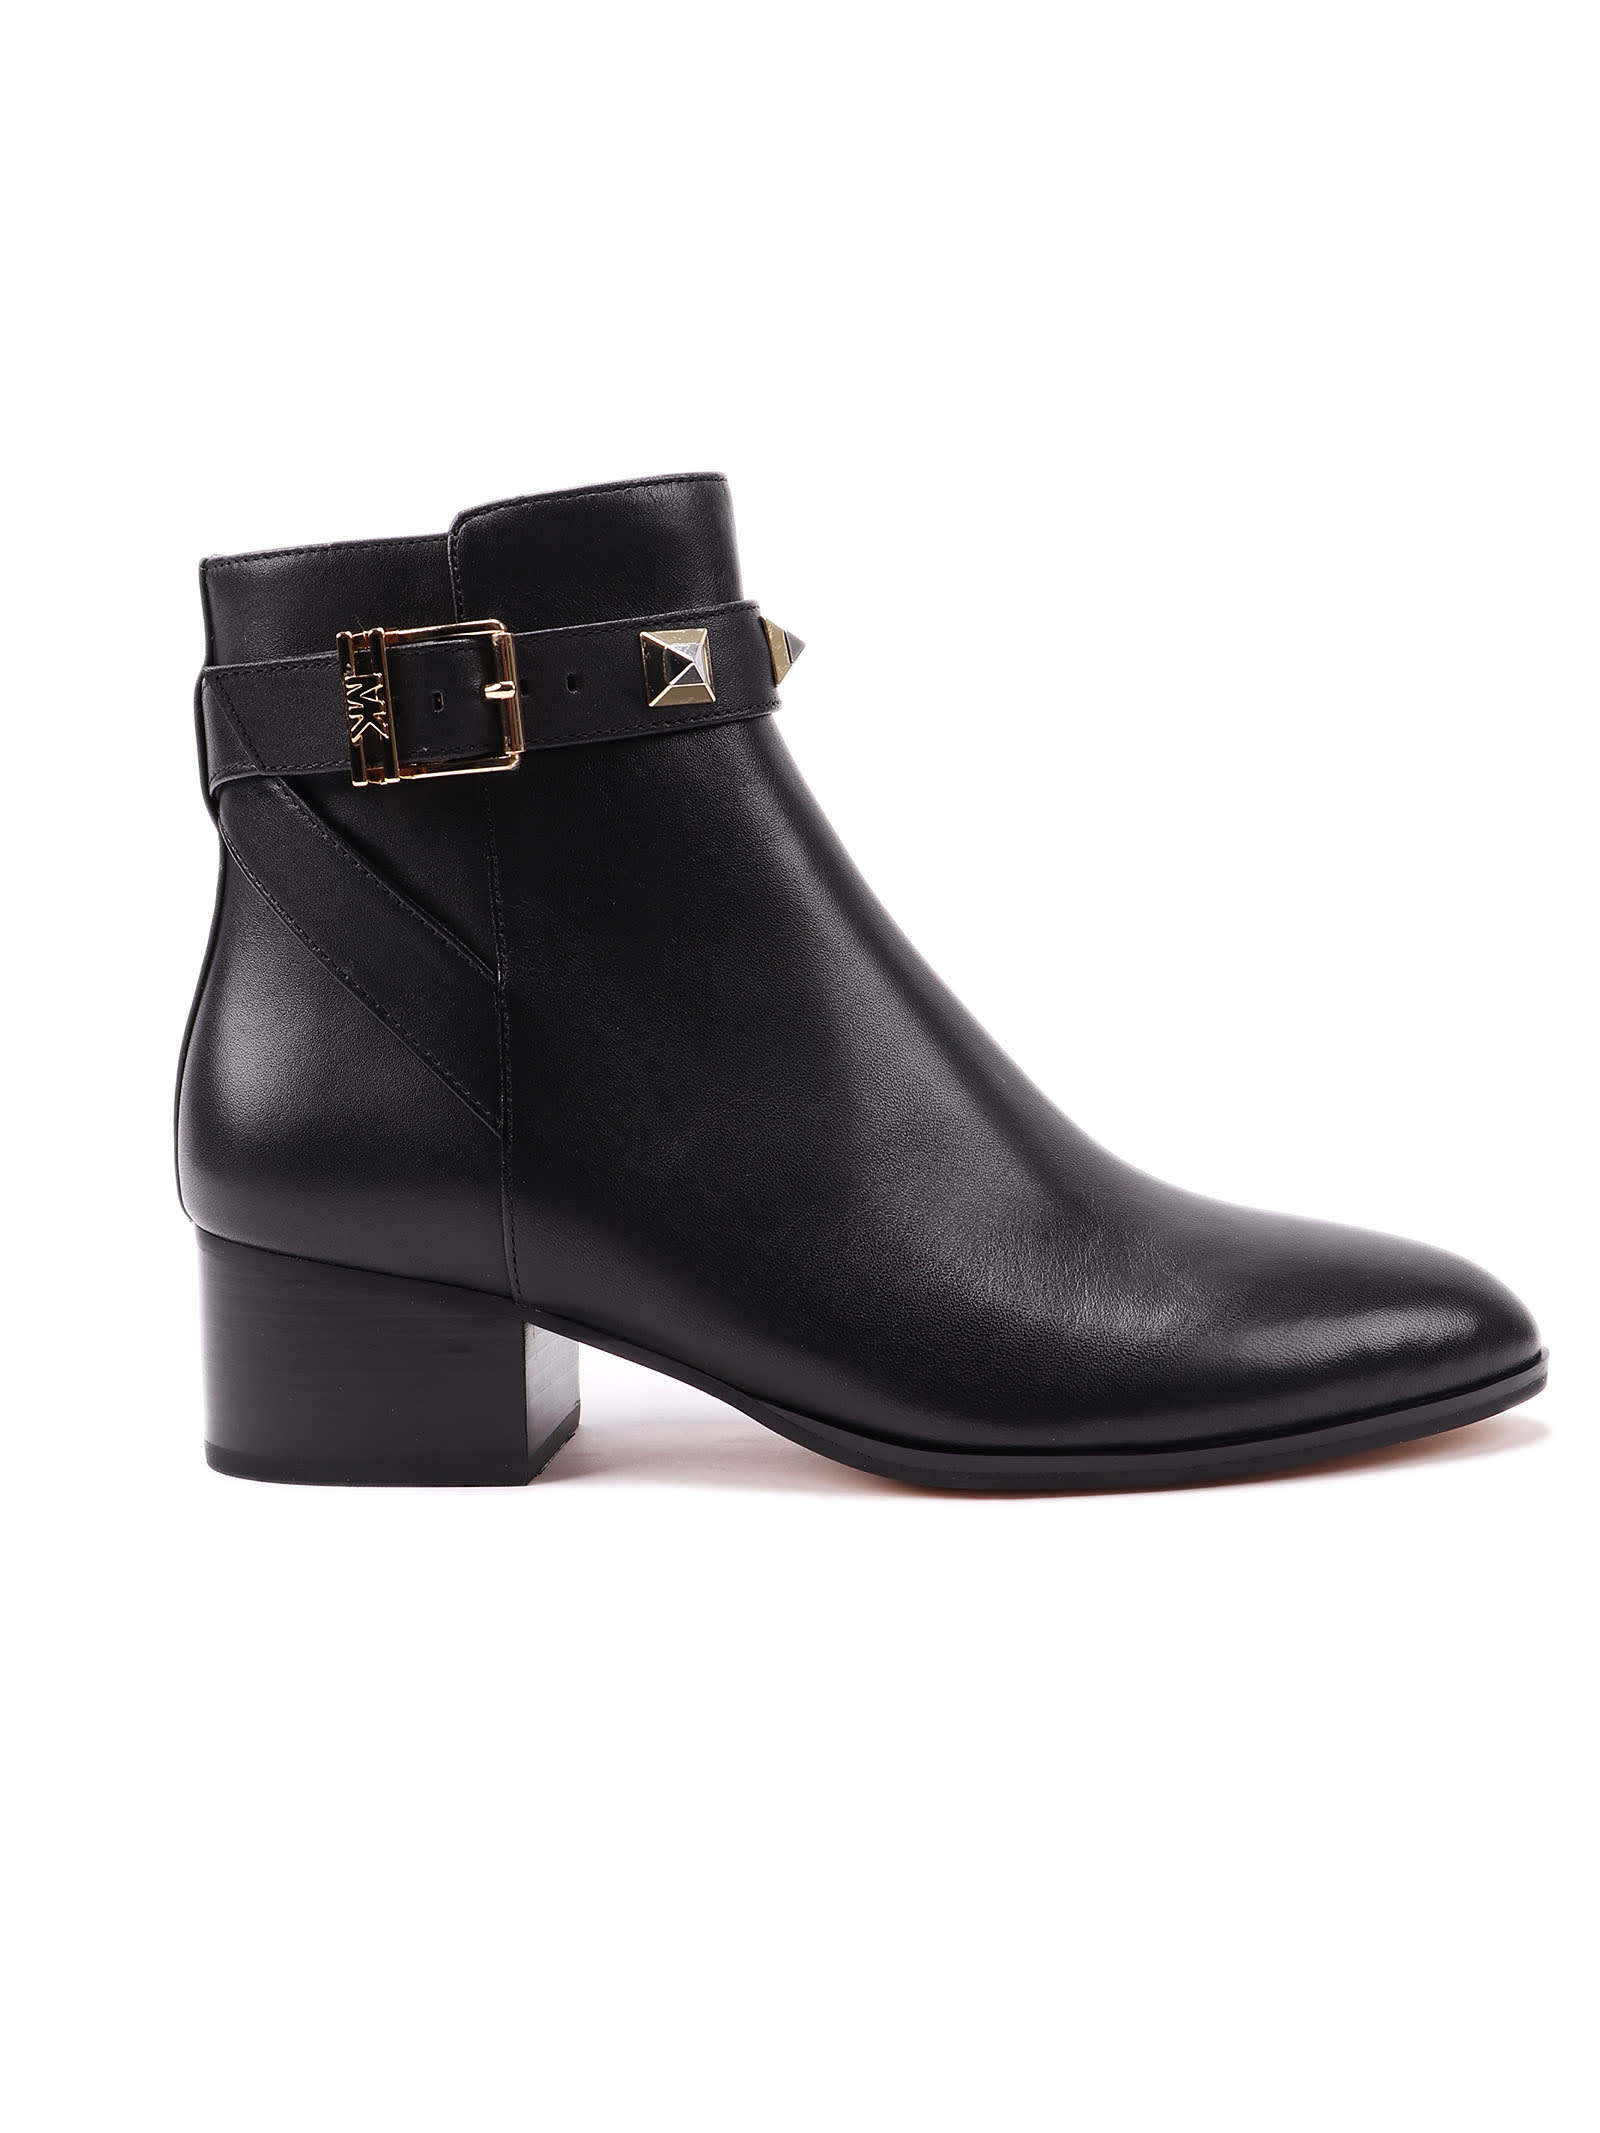 Michael Kors Collection Britton Ankle Boot